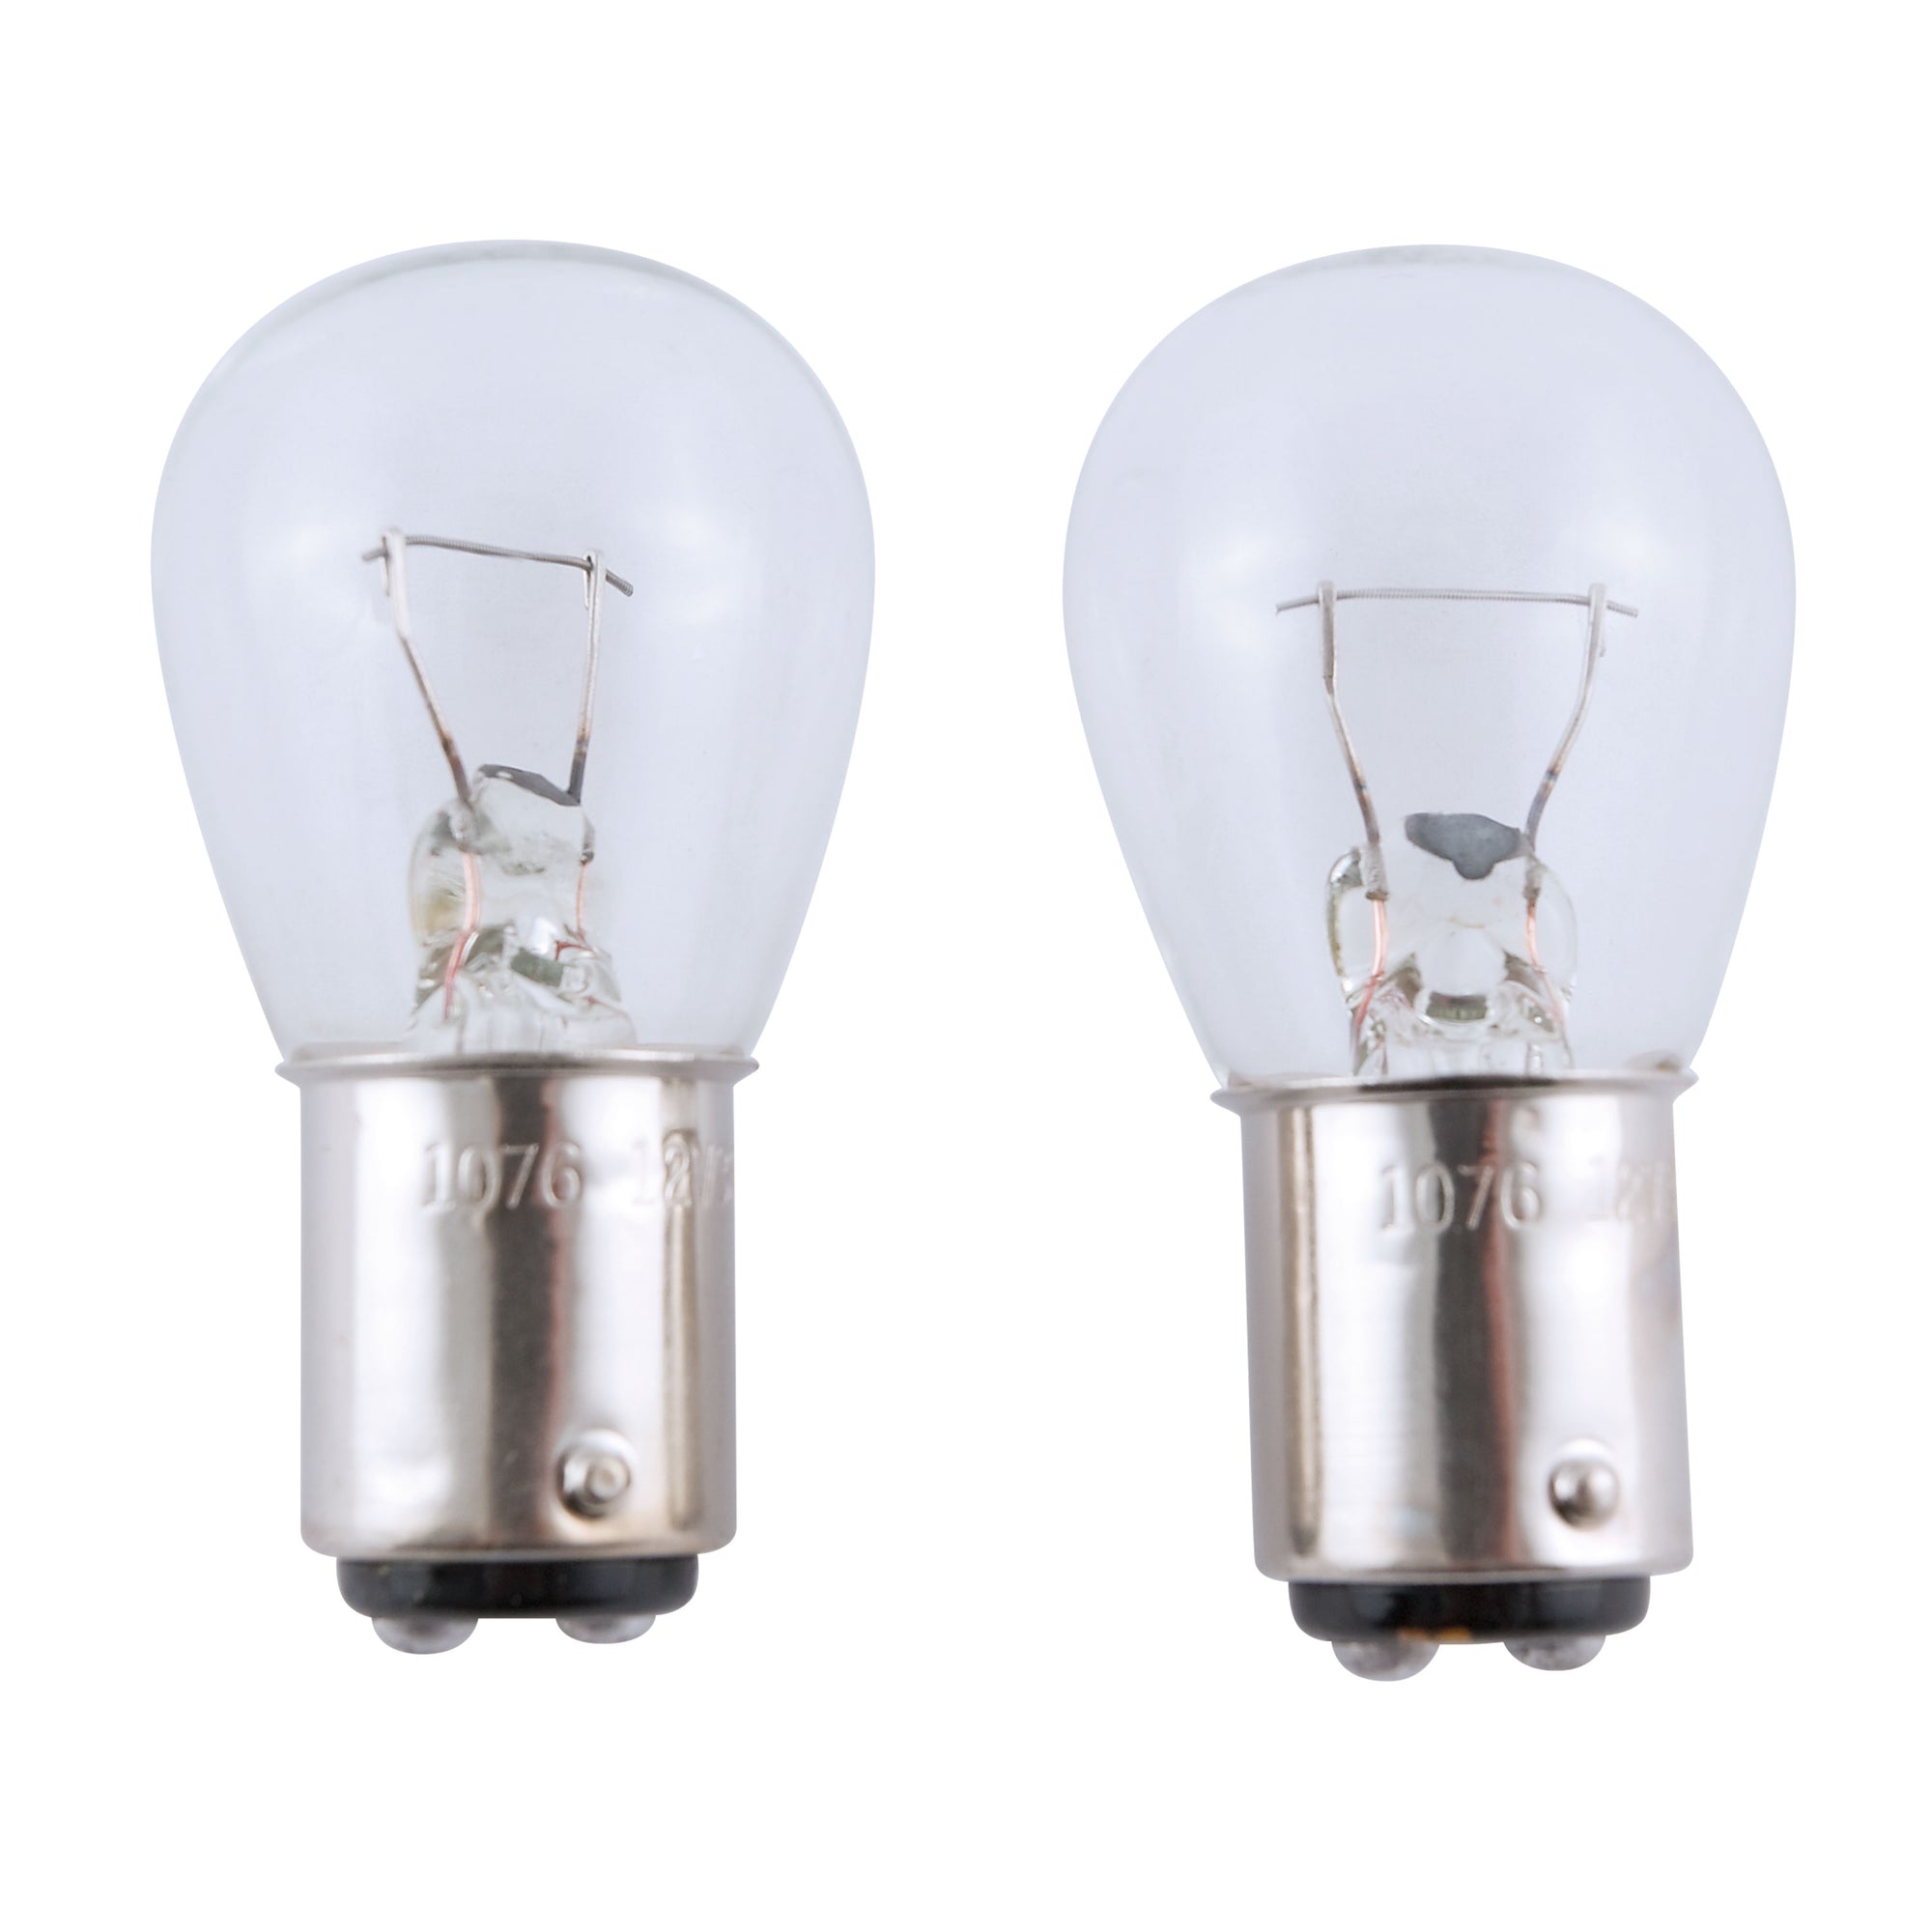 AP Products 016-02-1076 Bulb - #1076, 2 Pack